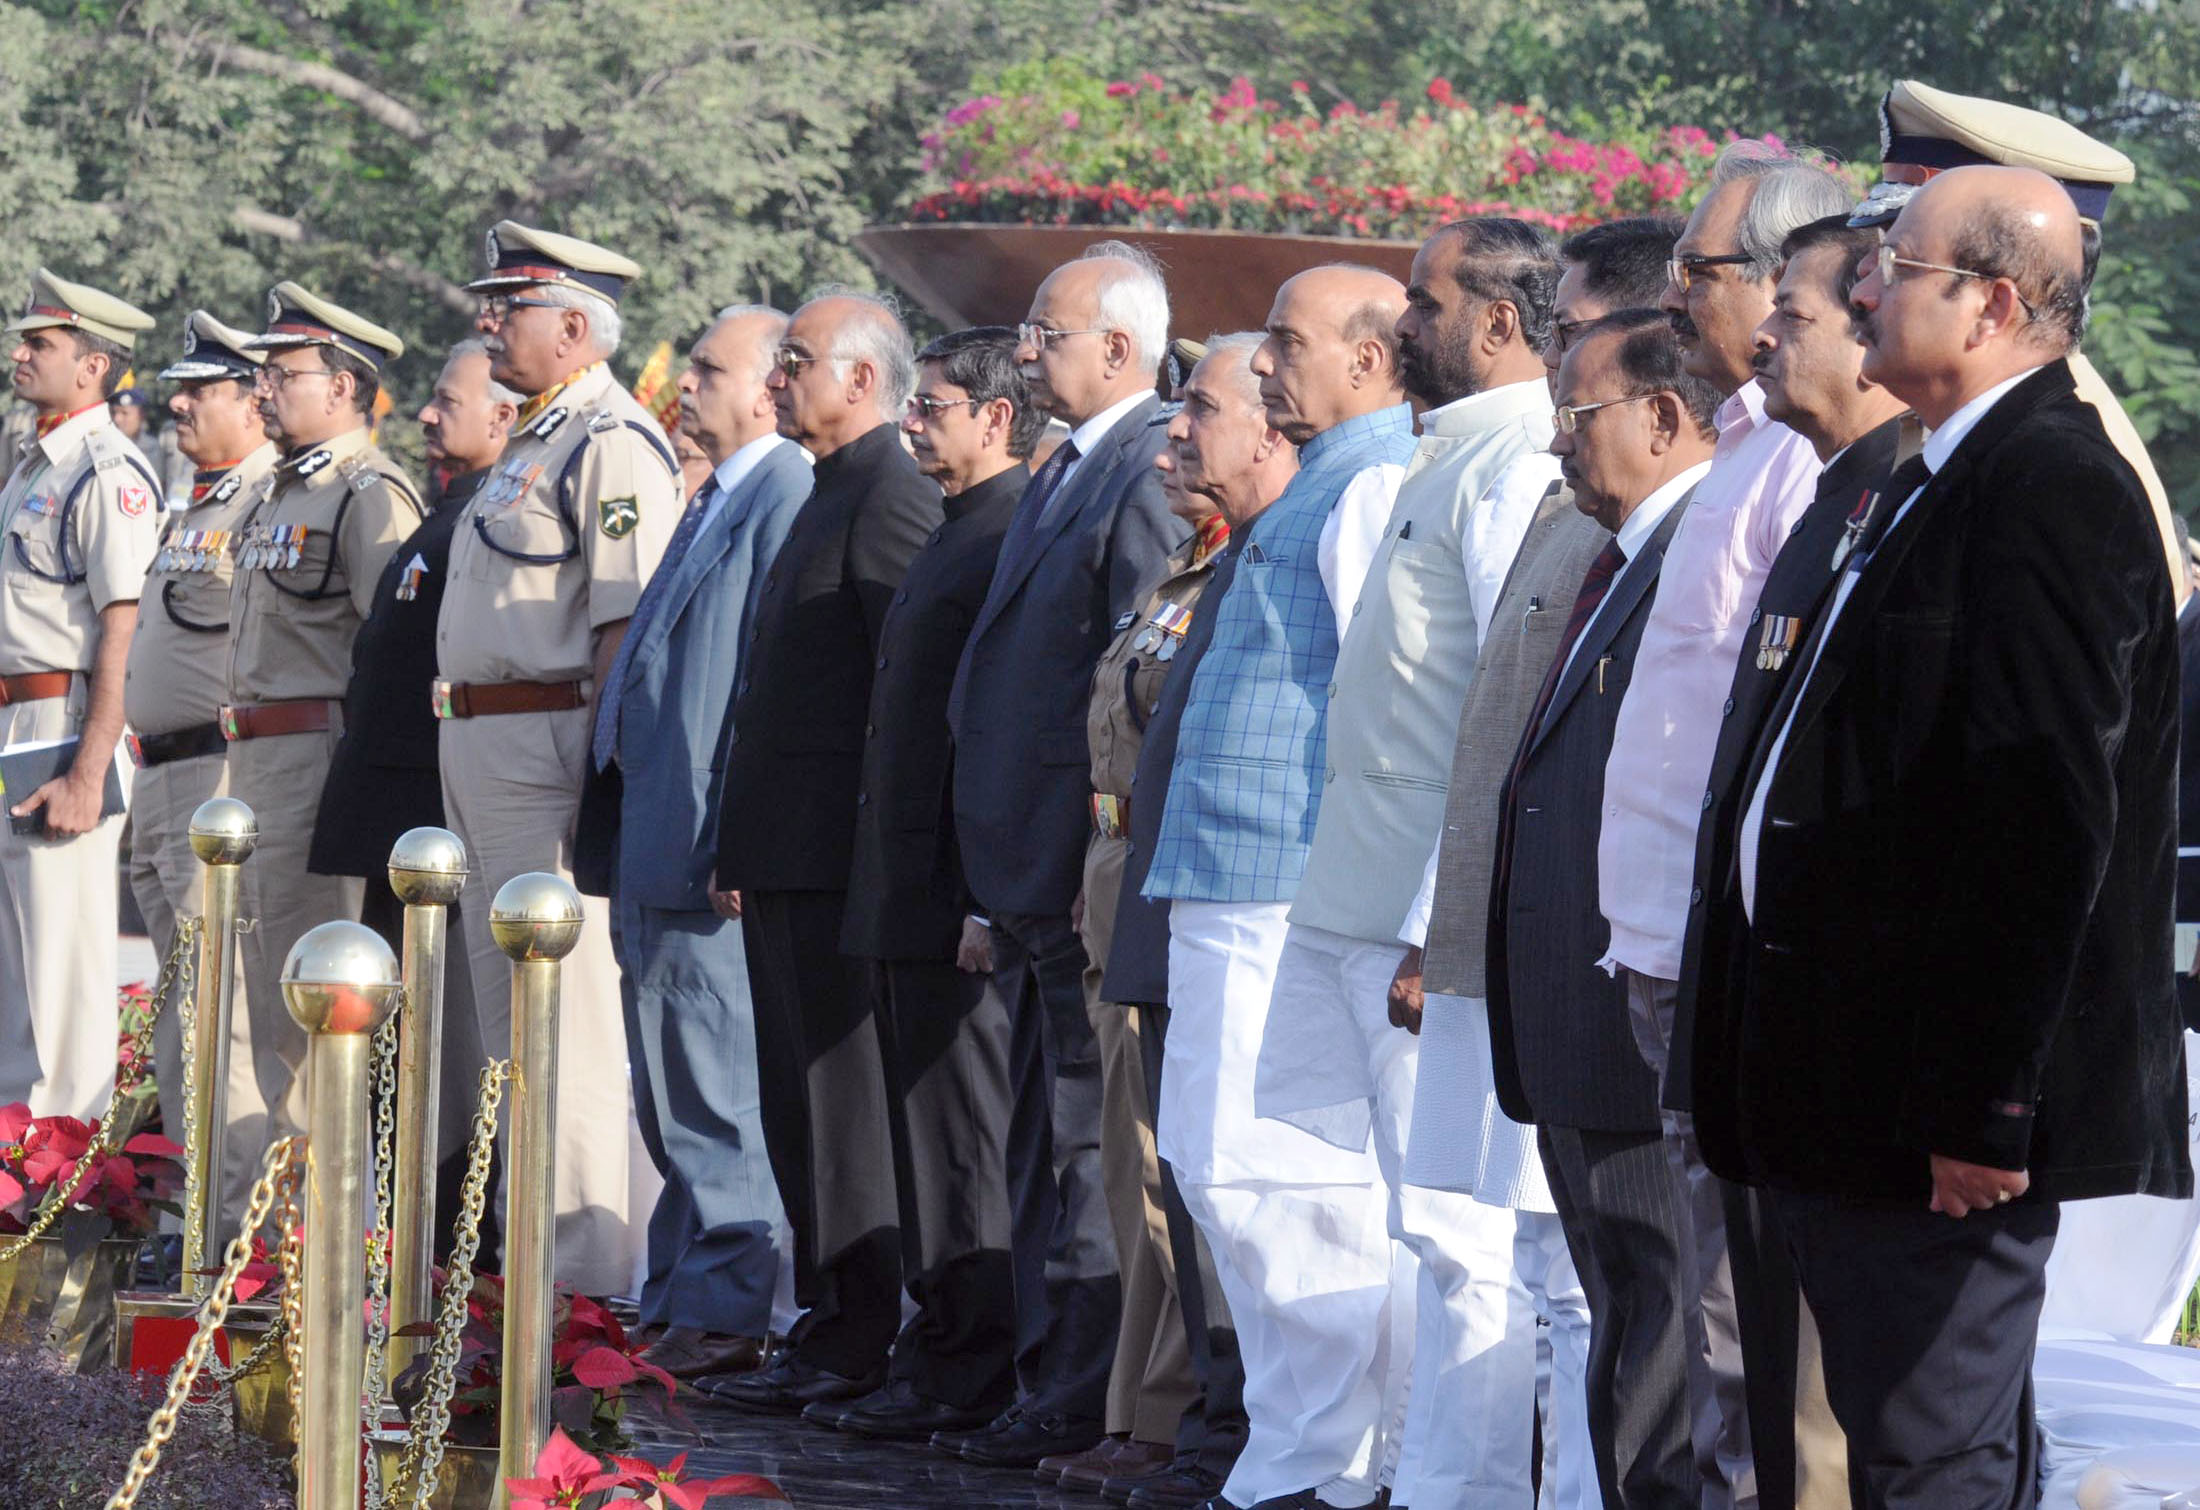 The Union Home Minister, Shri Rajnath Singh, the Minister of State for Home Affairs, Shri Hansraj Gangaram Ahir, the Minister of State for Home Affairs, Shri Kiren Rijiju and other dignitaries, at the Police Commemoration Day Parade, in New Delhi on October 21, 2016.